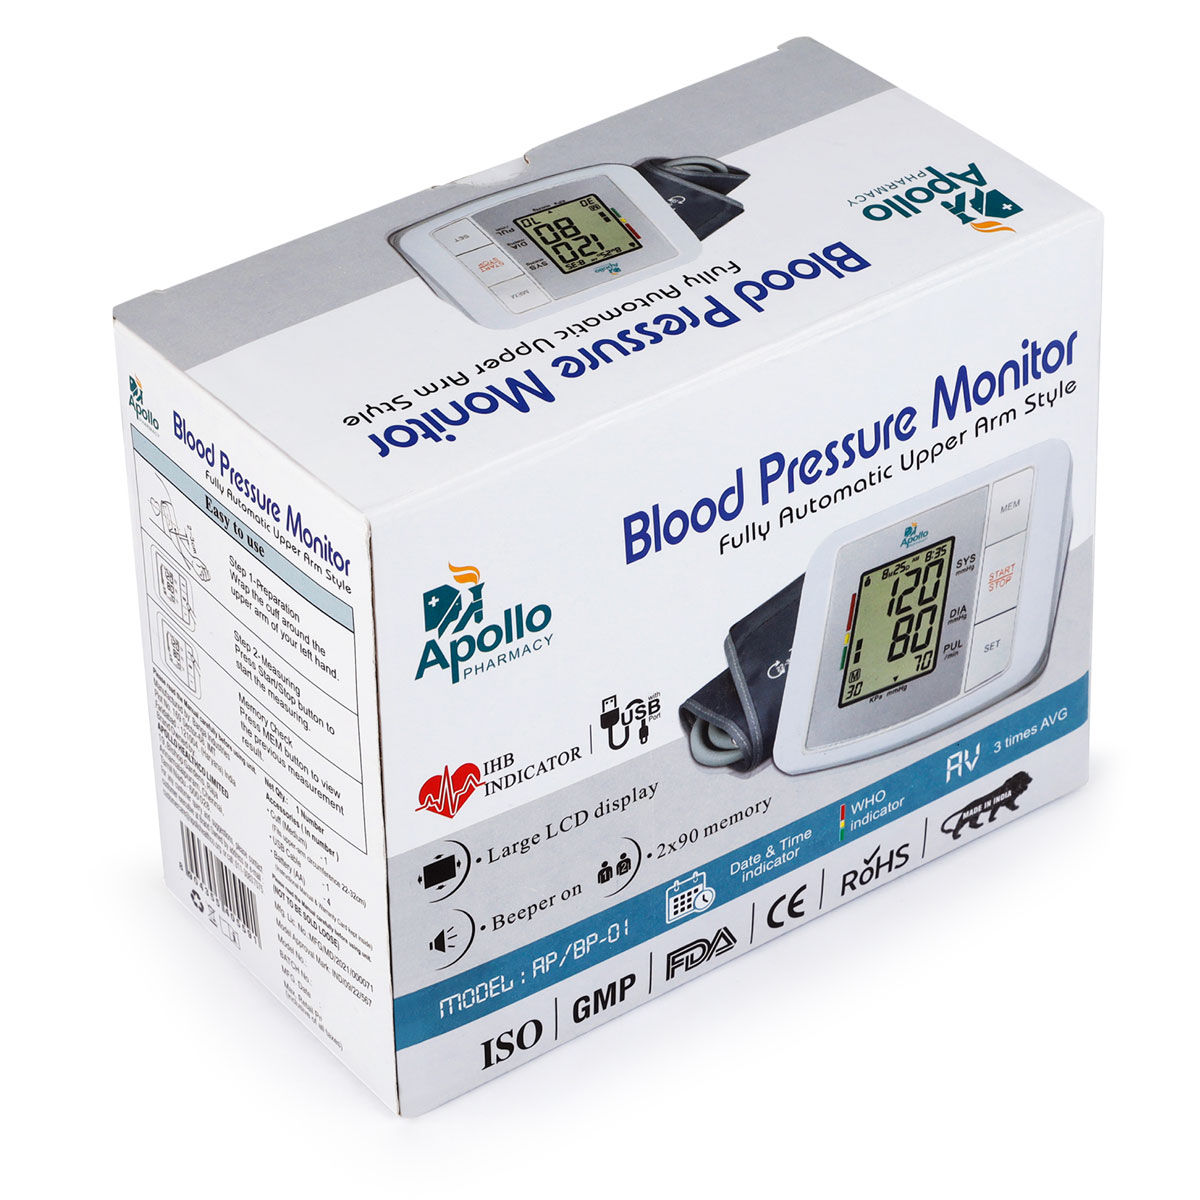 Apollo Pharmacy Blood Pressure Monitor AP/BP-01, 1 Count, Pack of 1 